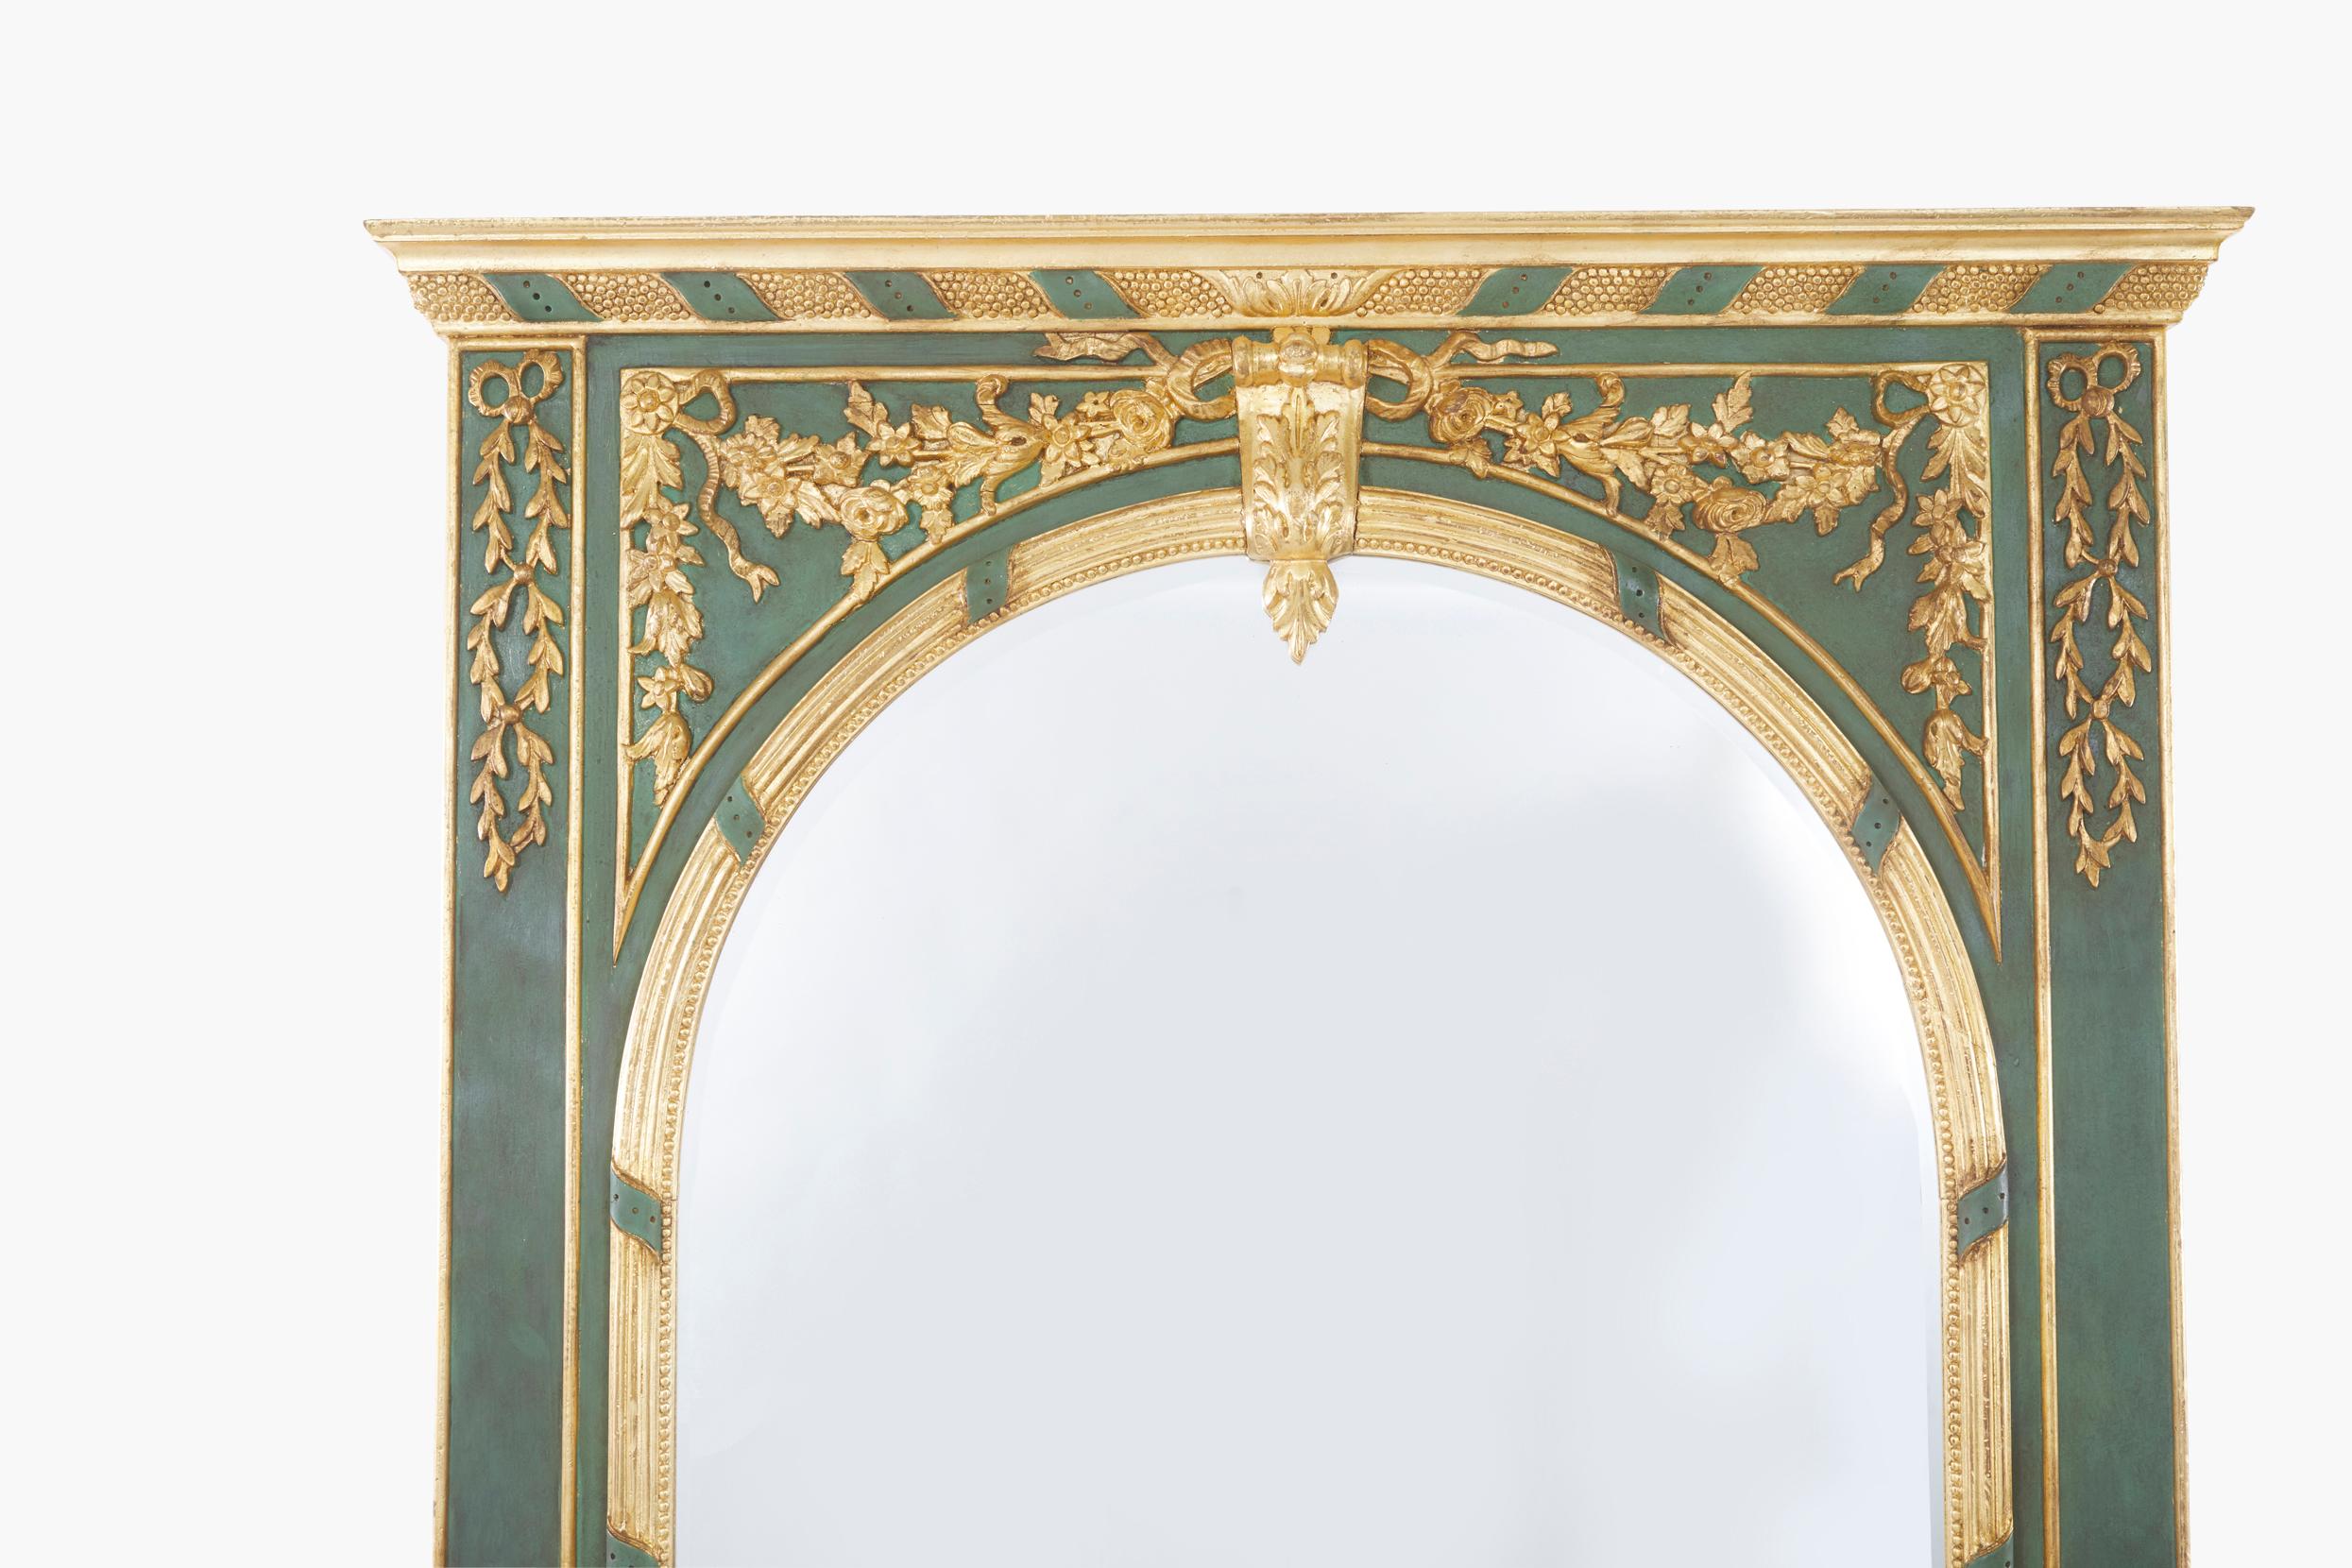 Impressive 19th century painted and gilt frame Italian pier mirror with gilded top design details. The pier mirror is in great antique condition with remarkably intact gold gilt and intricate carved and painted details. Minor wear appropriate to age